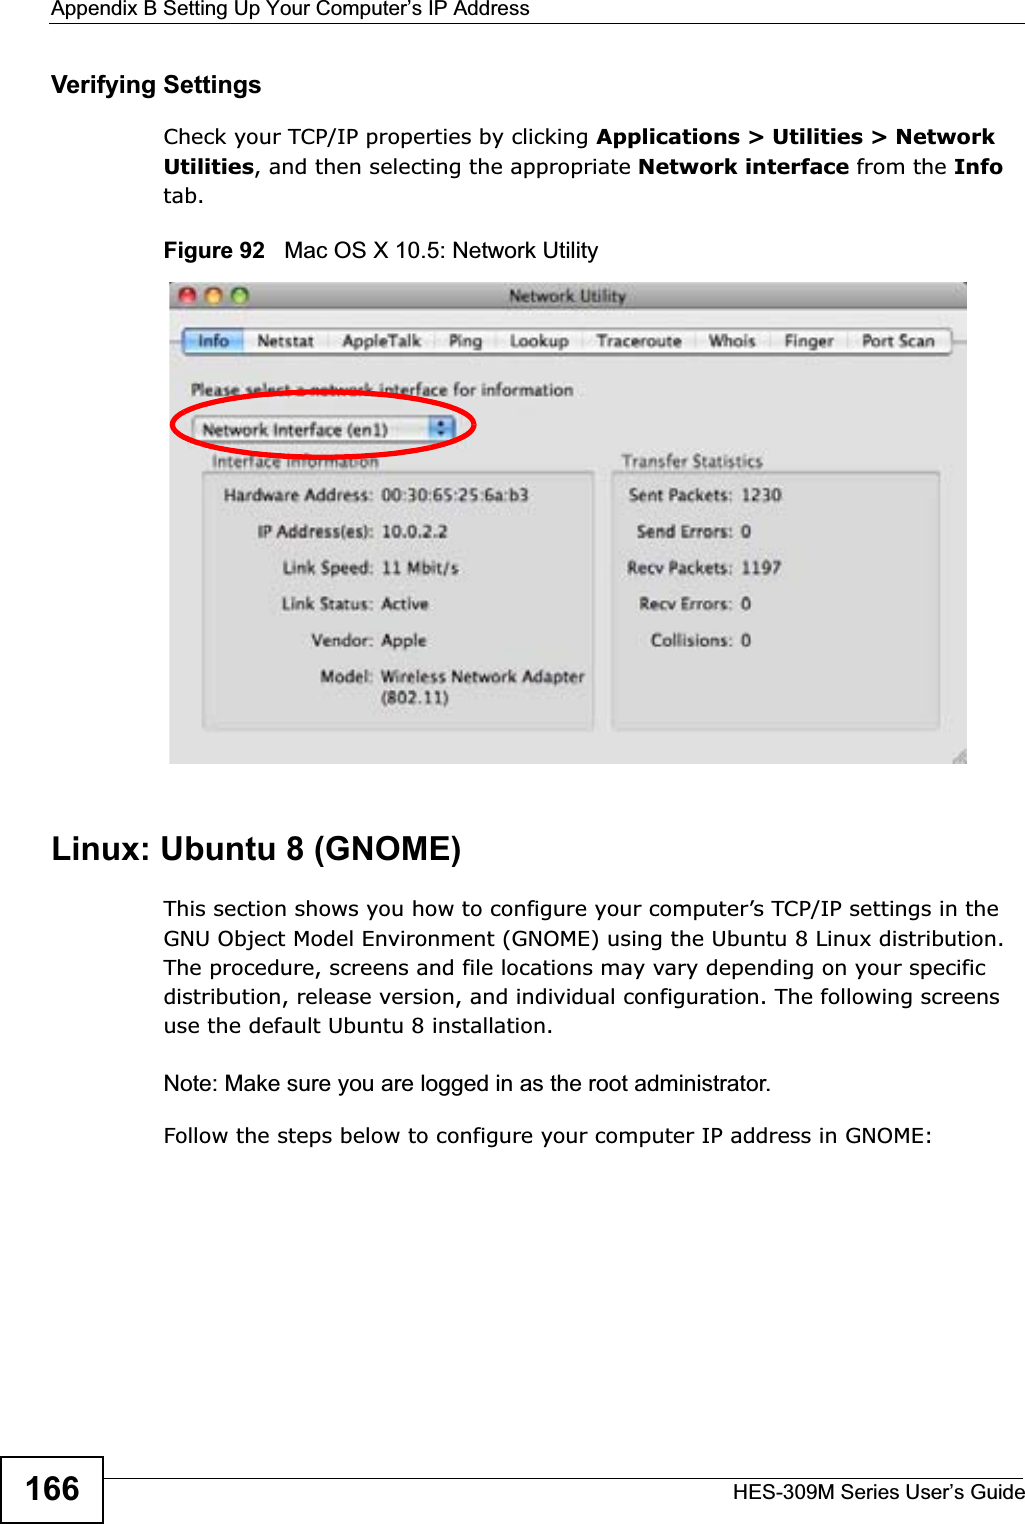 Appendix B Setting Up Your Computer’s IP AddressHES-309M Series User’s Guide166Verifying SettingsCheck your TCP/IP properties by clicking Applications &gt; Utilities &gt; Network Utilities, and then selecting the appropriate Network interface from the Infotab.Figure 92   Mac OS X 10.5: Network UtilityLinux: Ubuntu 8 (GNOME)This section shows you how to configure your computer’s TCP/IP settings in the GNU Object Model Environment (GNOME) using the Ubuntu 8 Linux distribution. The procedure, screens and file locations may vary depending on your specific distribution, release version, and individual configuration. The following screens use the default Ubuntu 8 installation.Note: Make sure you are logged in as the root administrator. Follow the steps below to configure your computer IP address in GNOME: 